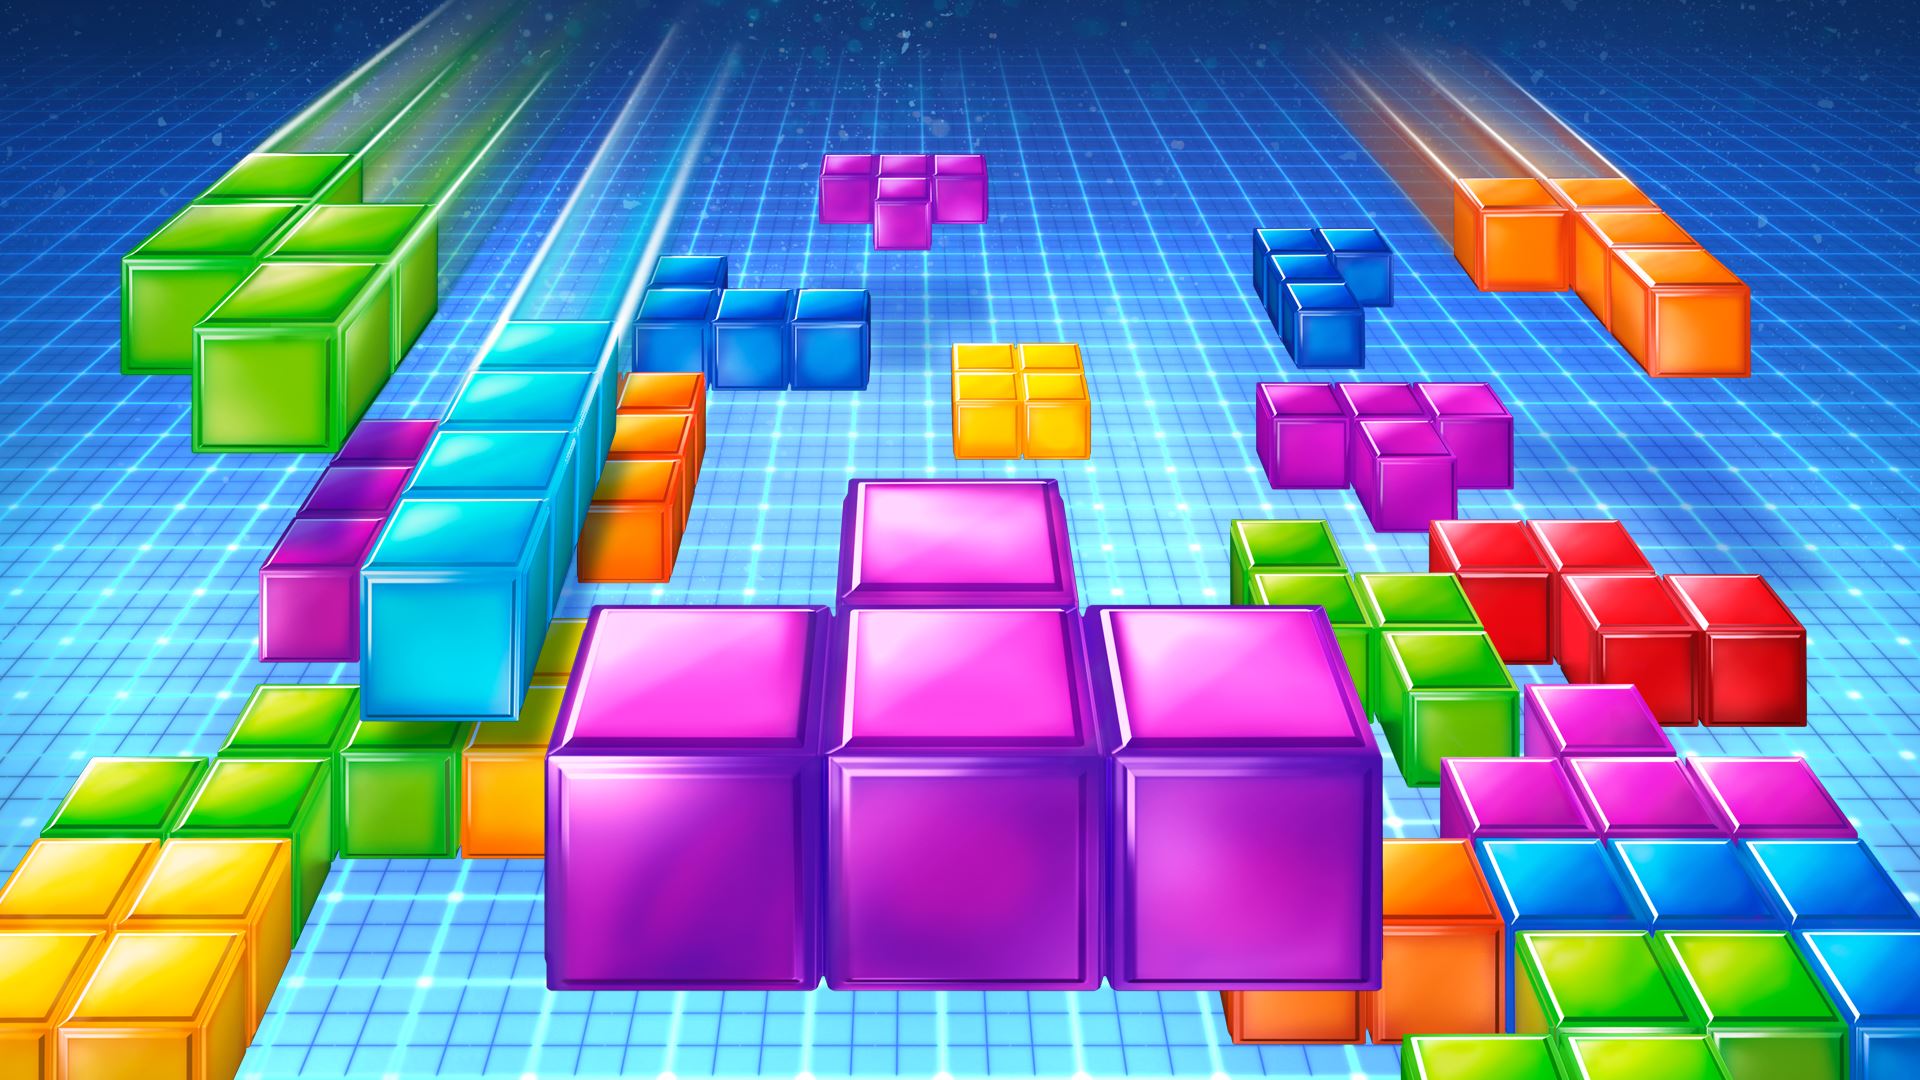 28 Tetris High Resolution Backgrounds GsFDcY